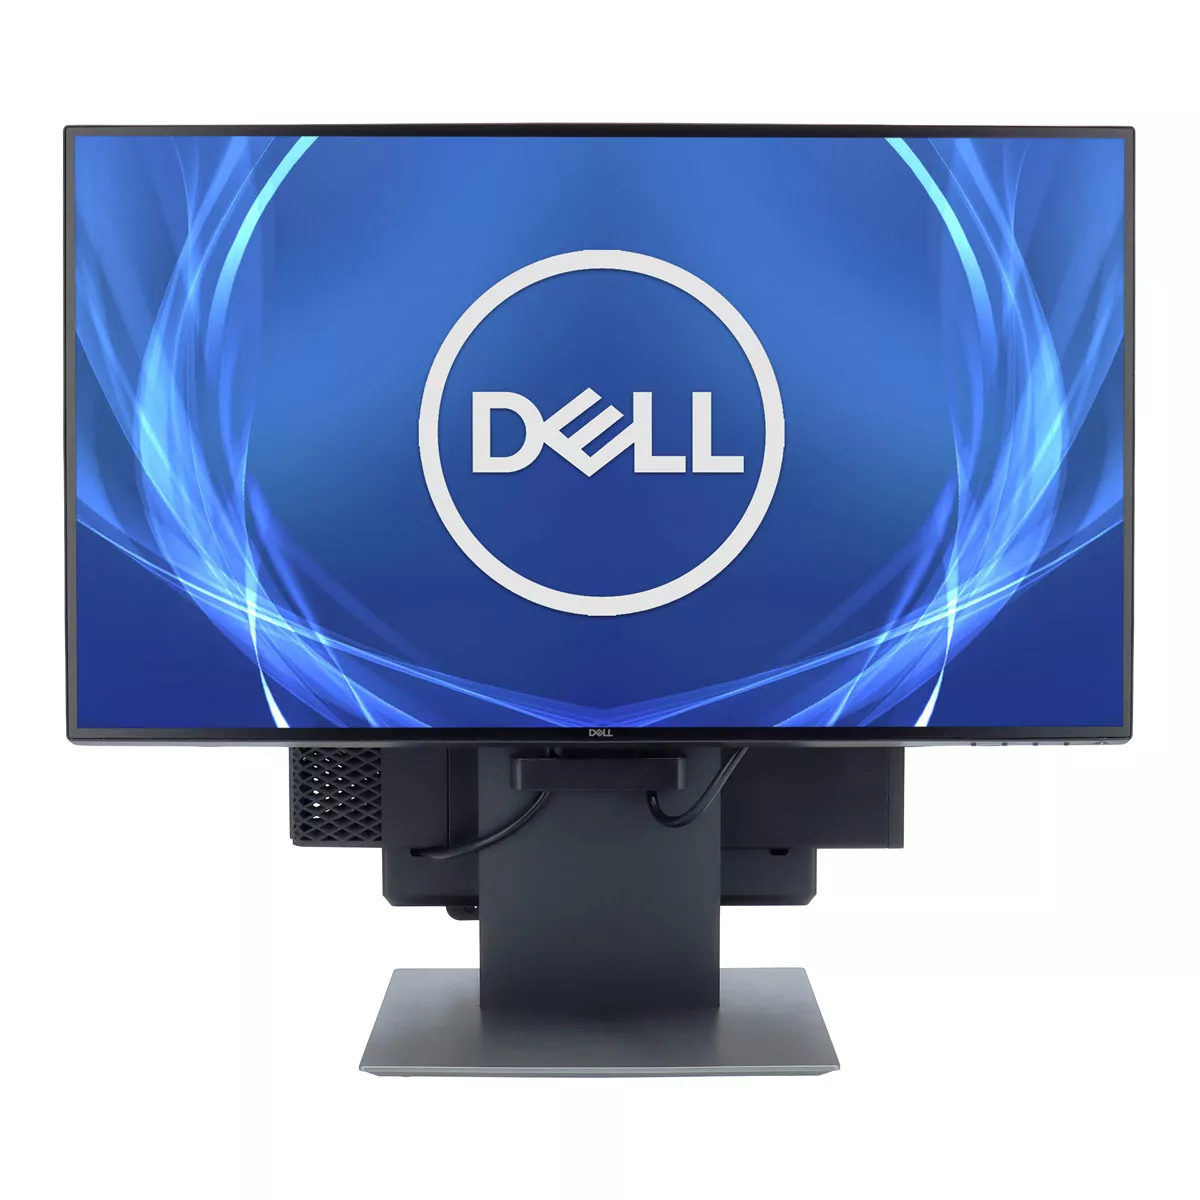 Dell All-in-One 3050 Core i5 6500  27 Zoll U2717D B